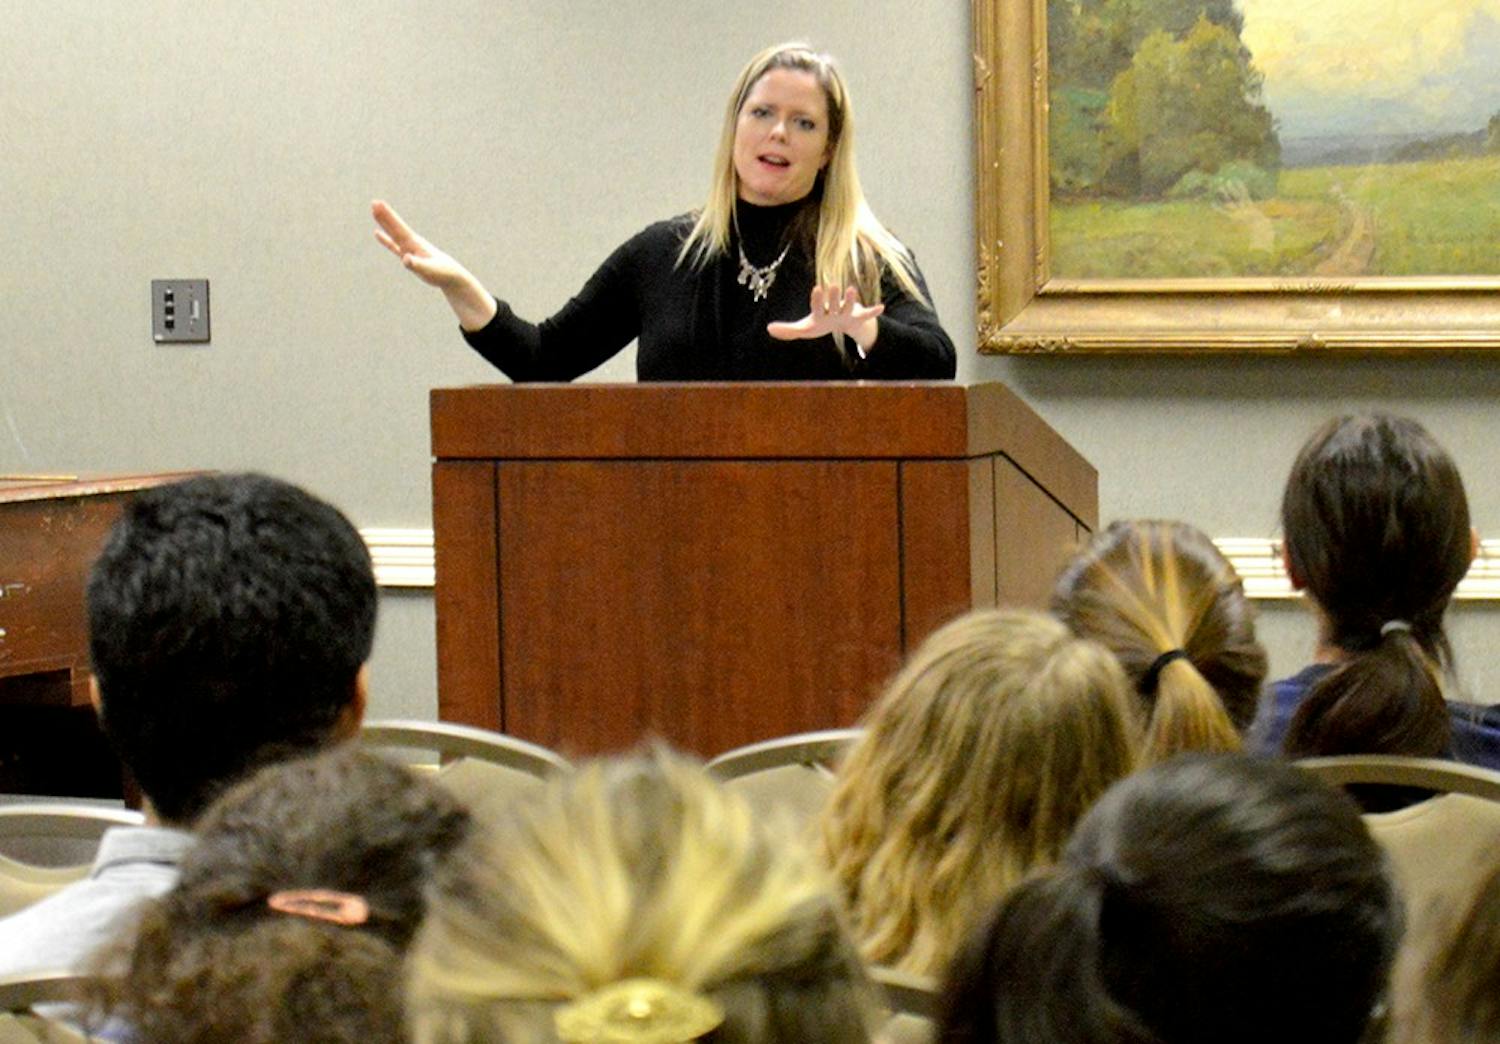 Jennifer Thurma, director of Victim Services for the Indiana Attorney General, speaks about the sources and statistics behind human trafficking Tuesday at State Room East in the Indiana Memorial Union. "The Hidden Reality: An Interactive Program on Human Trafficking" included an interactive process that led participants through various countries where human trafficking occurs. 